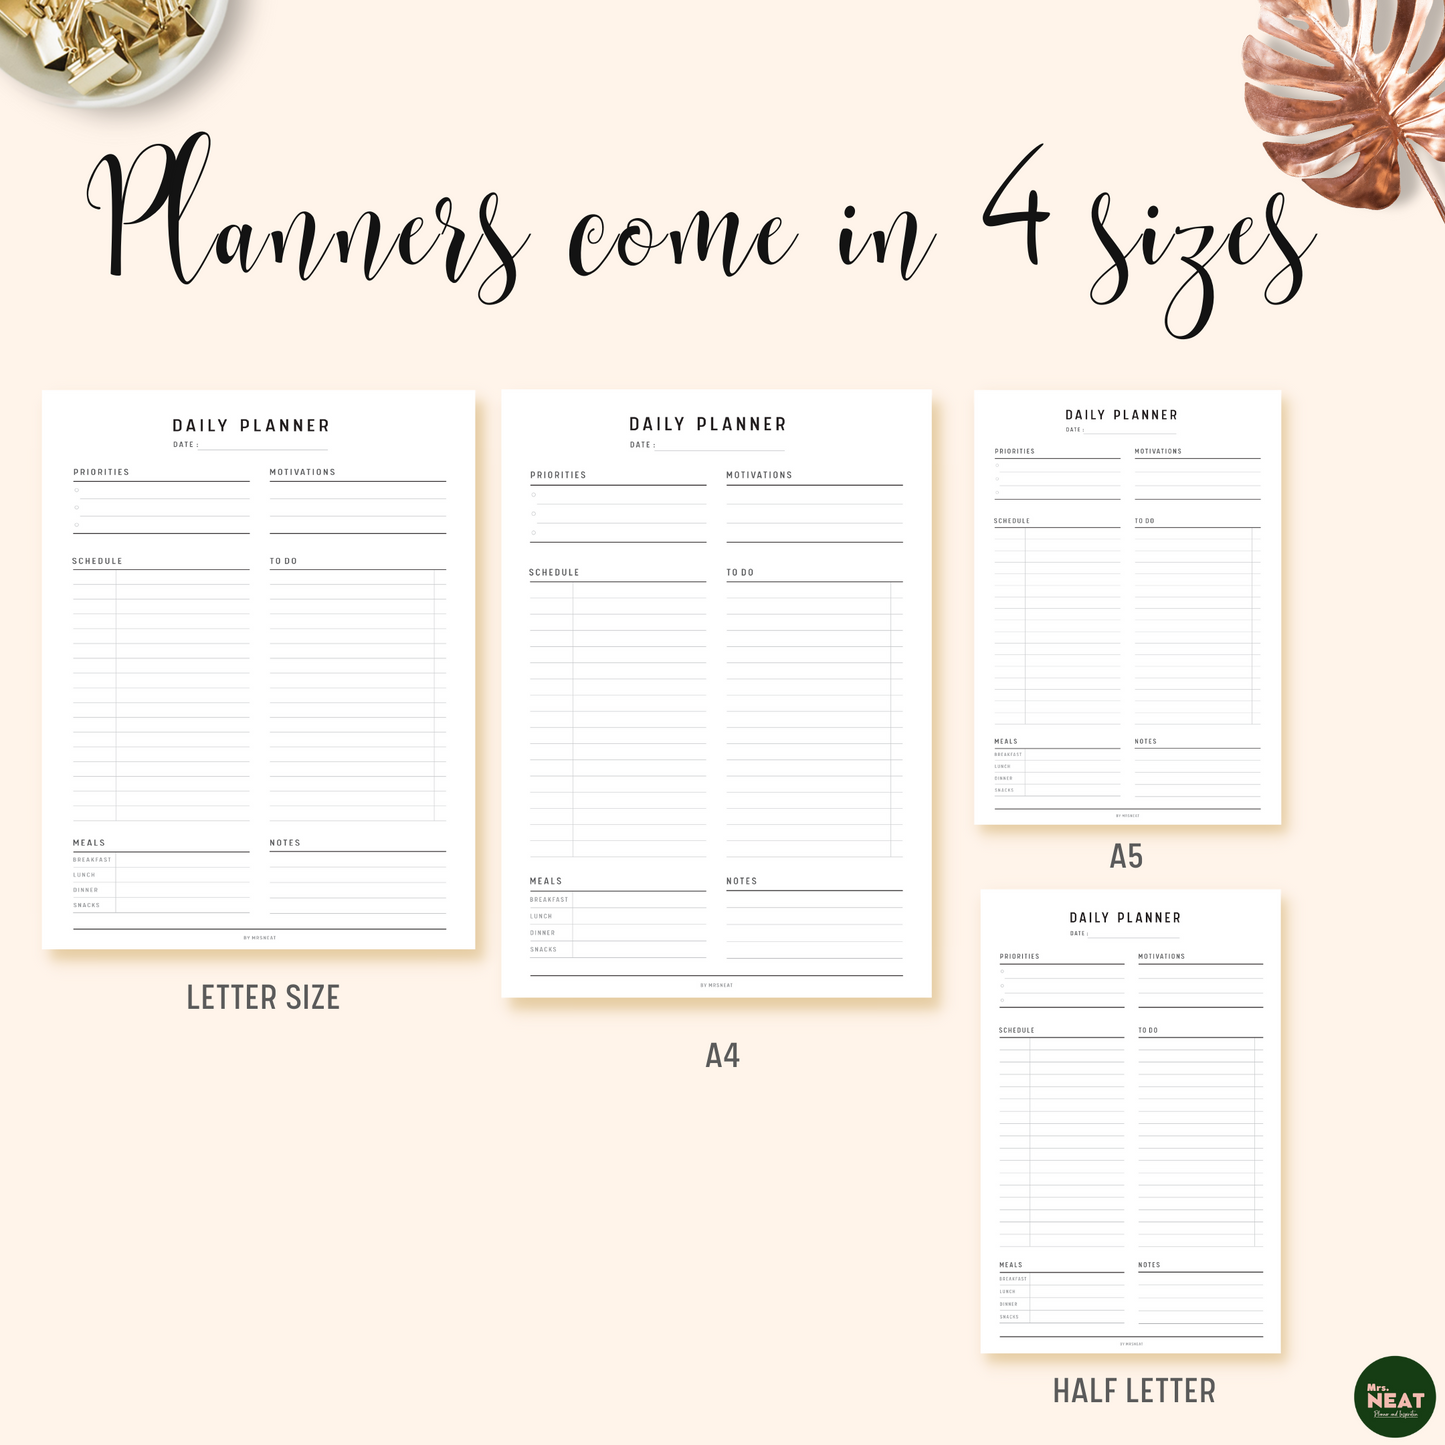 Daily Planner Printable in A4, Letter, A5 and Half Letter size